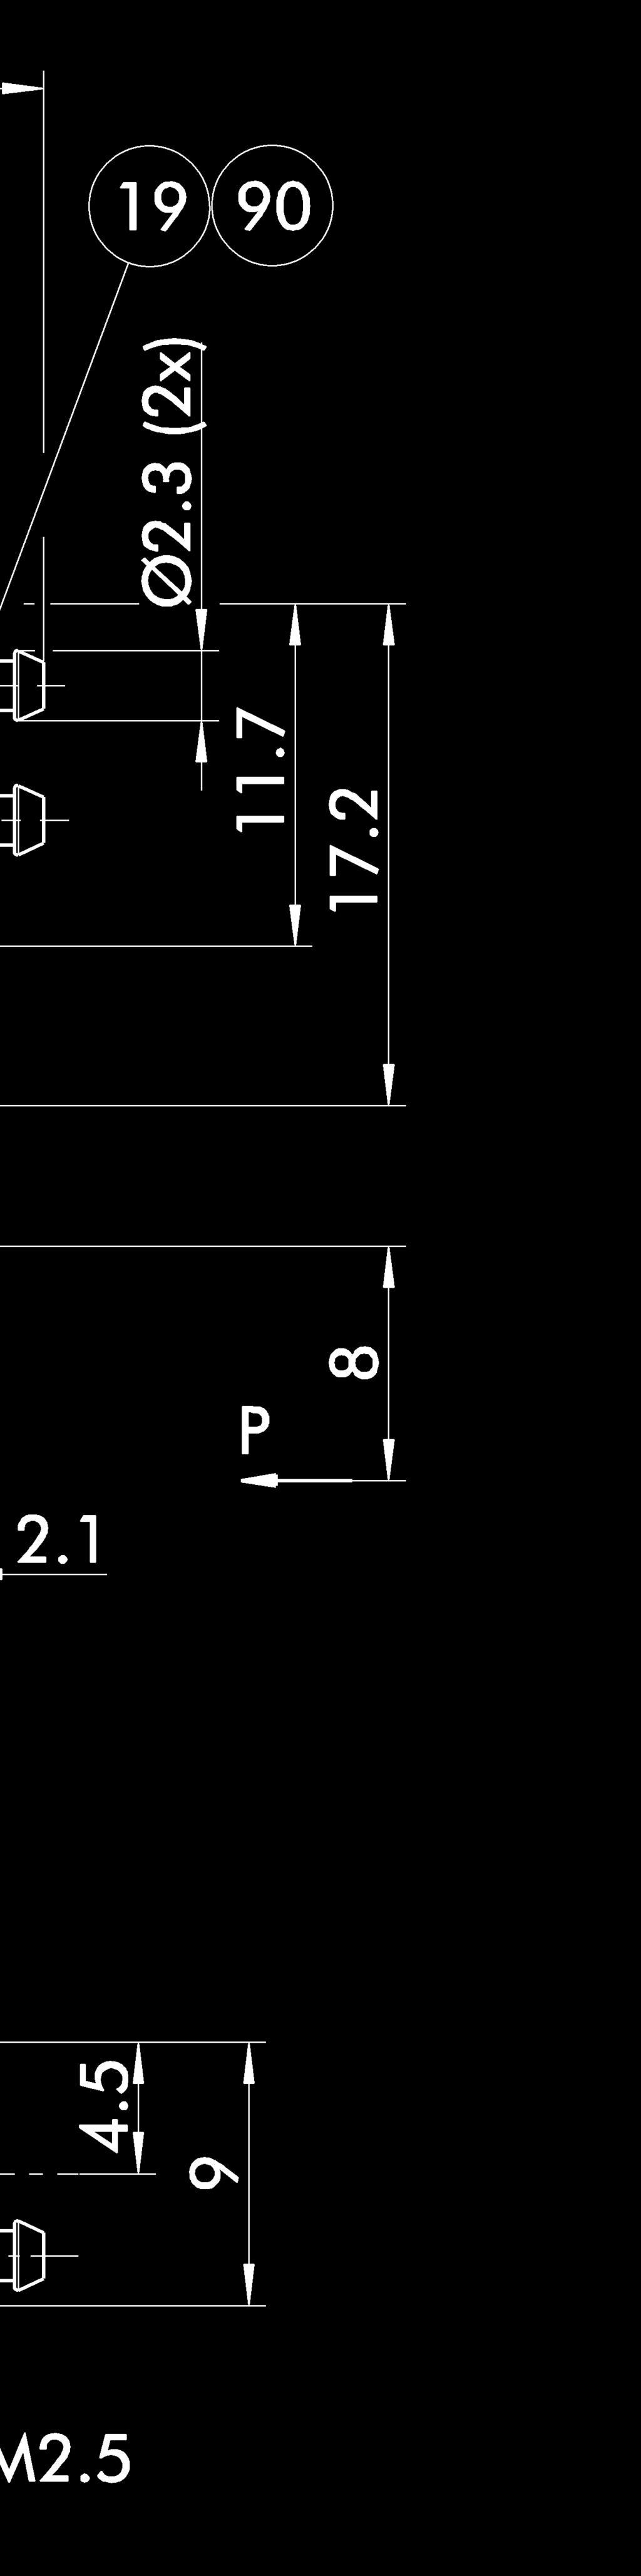 MPG-plus Functonal descrpton The oval pston s moved up or down by compressed ar.